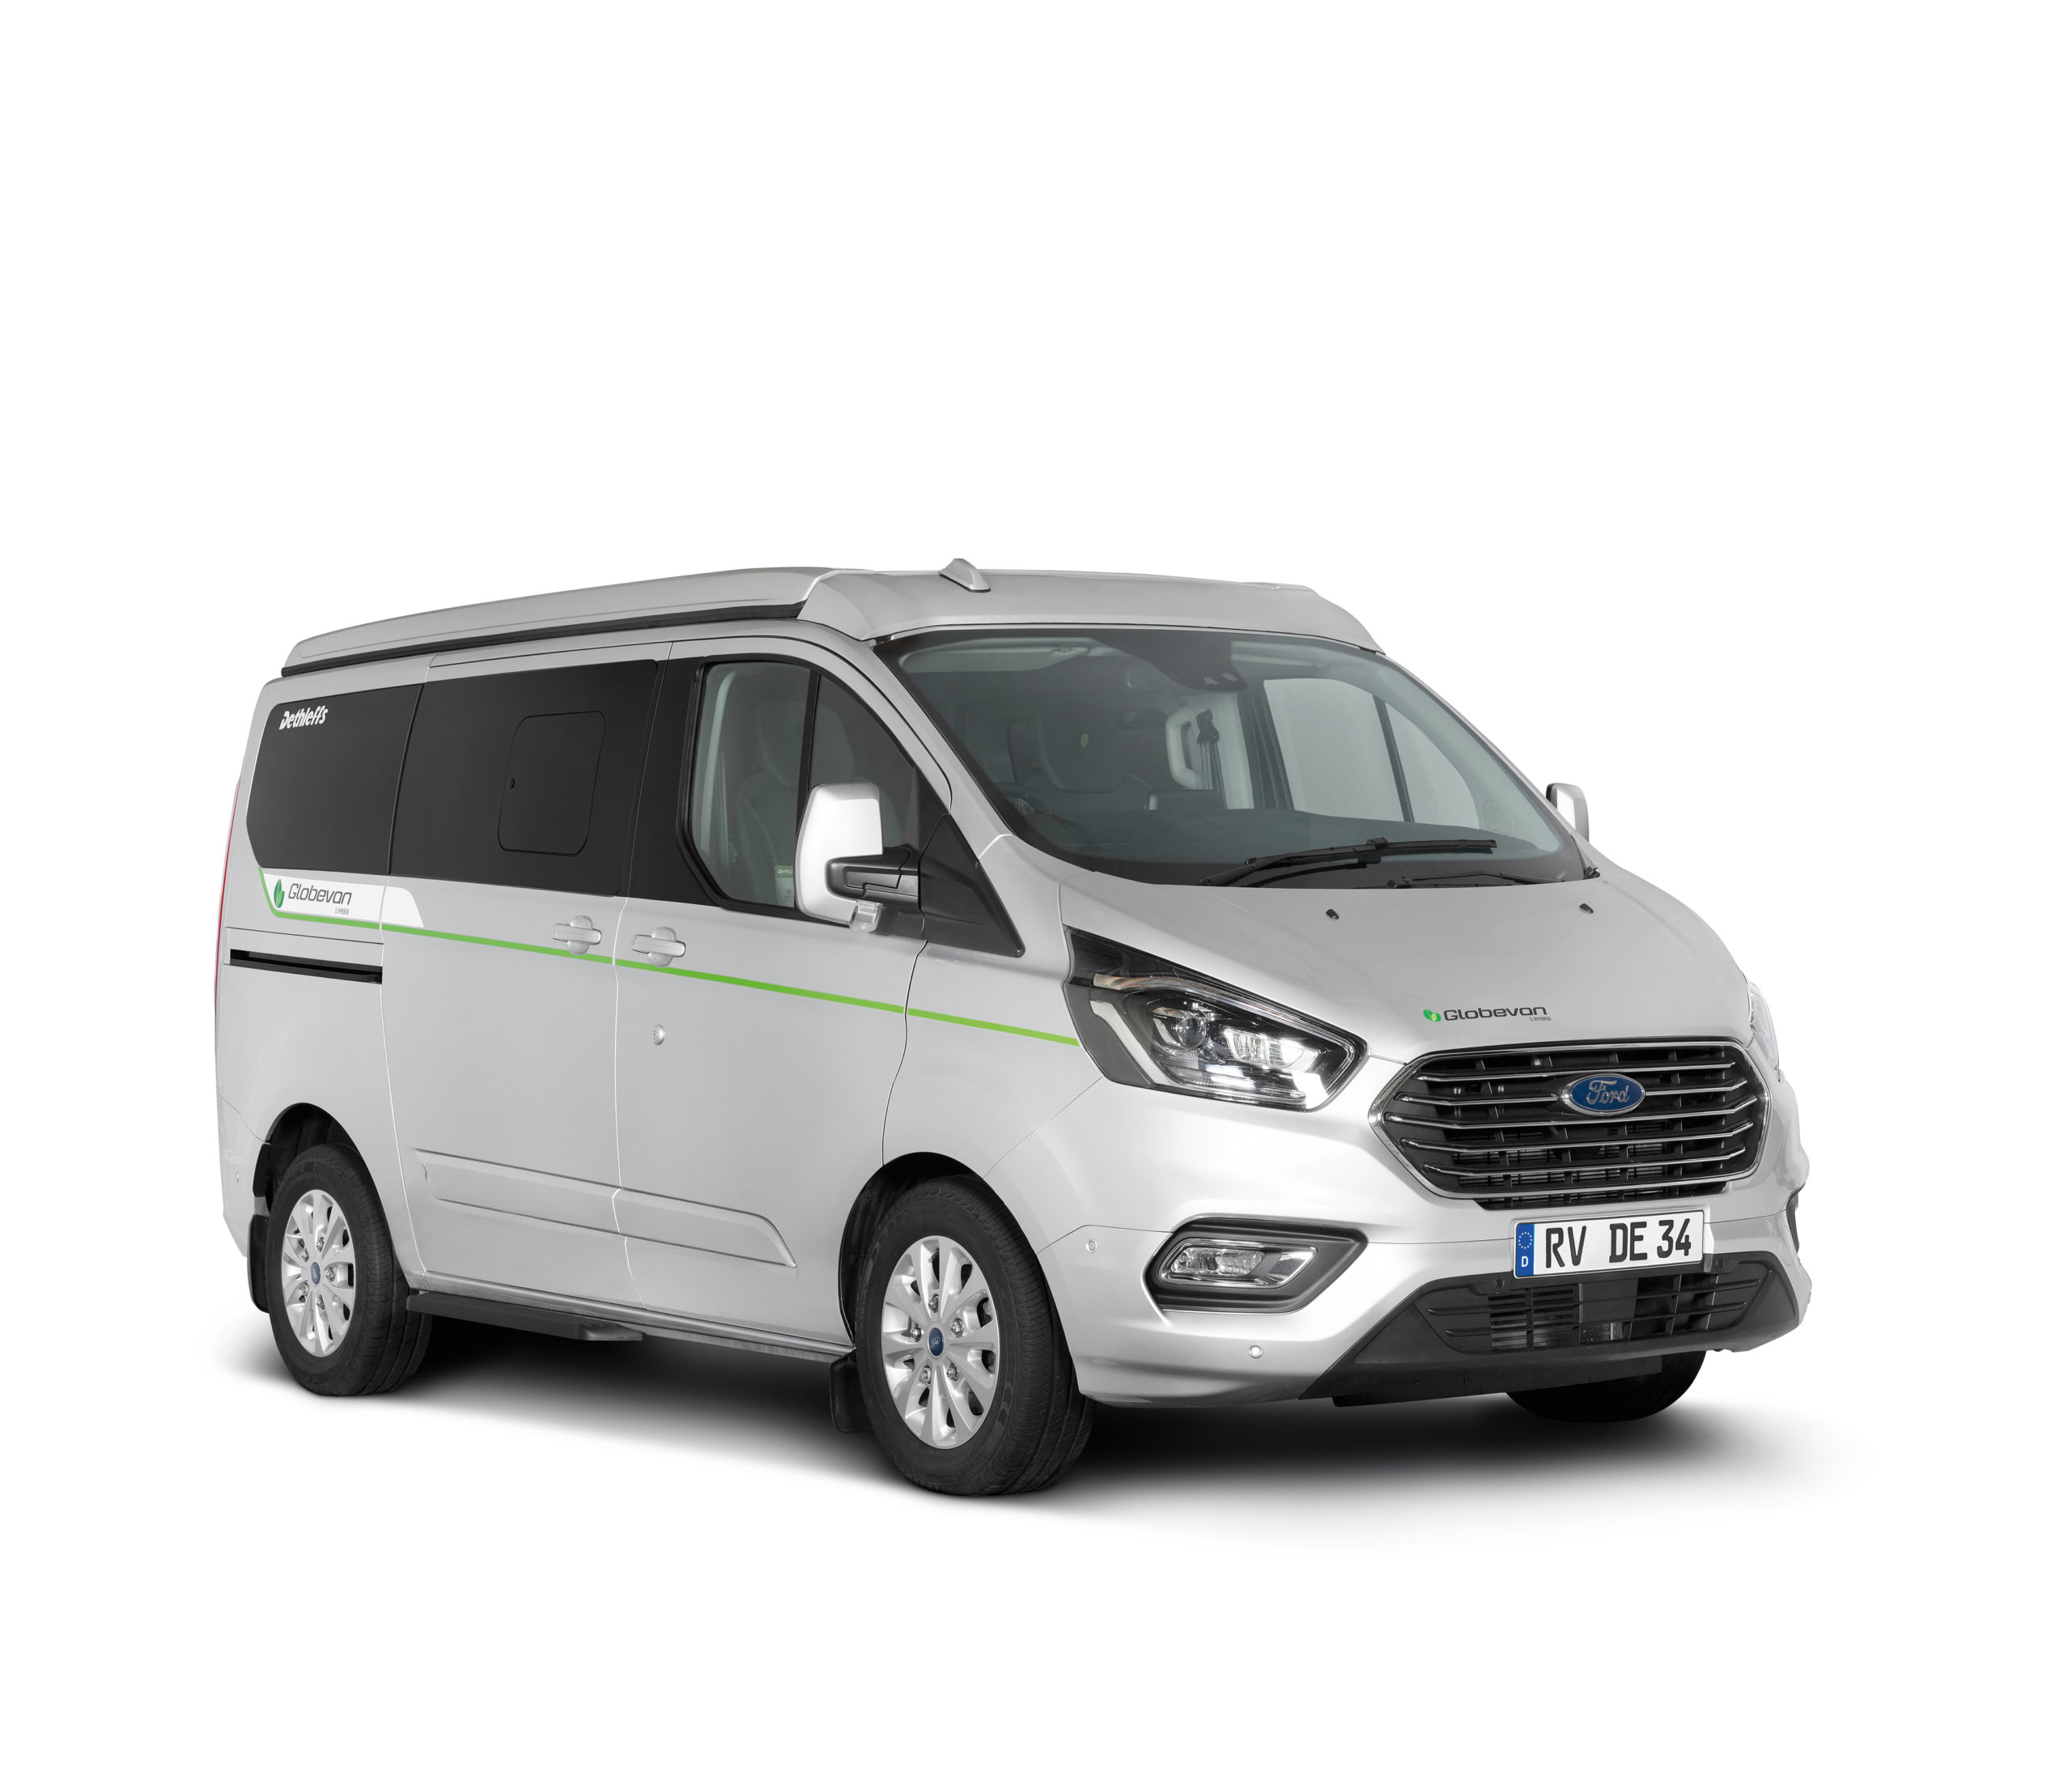 Dethleffs: electric motorhome without range anxiety